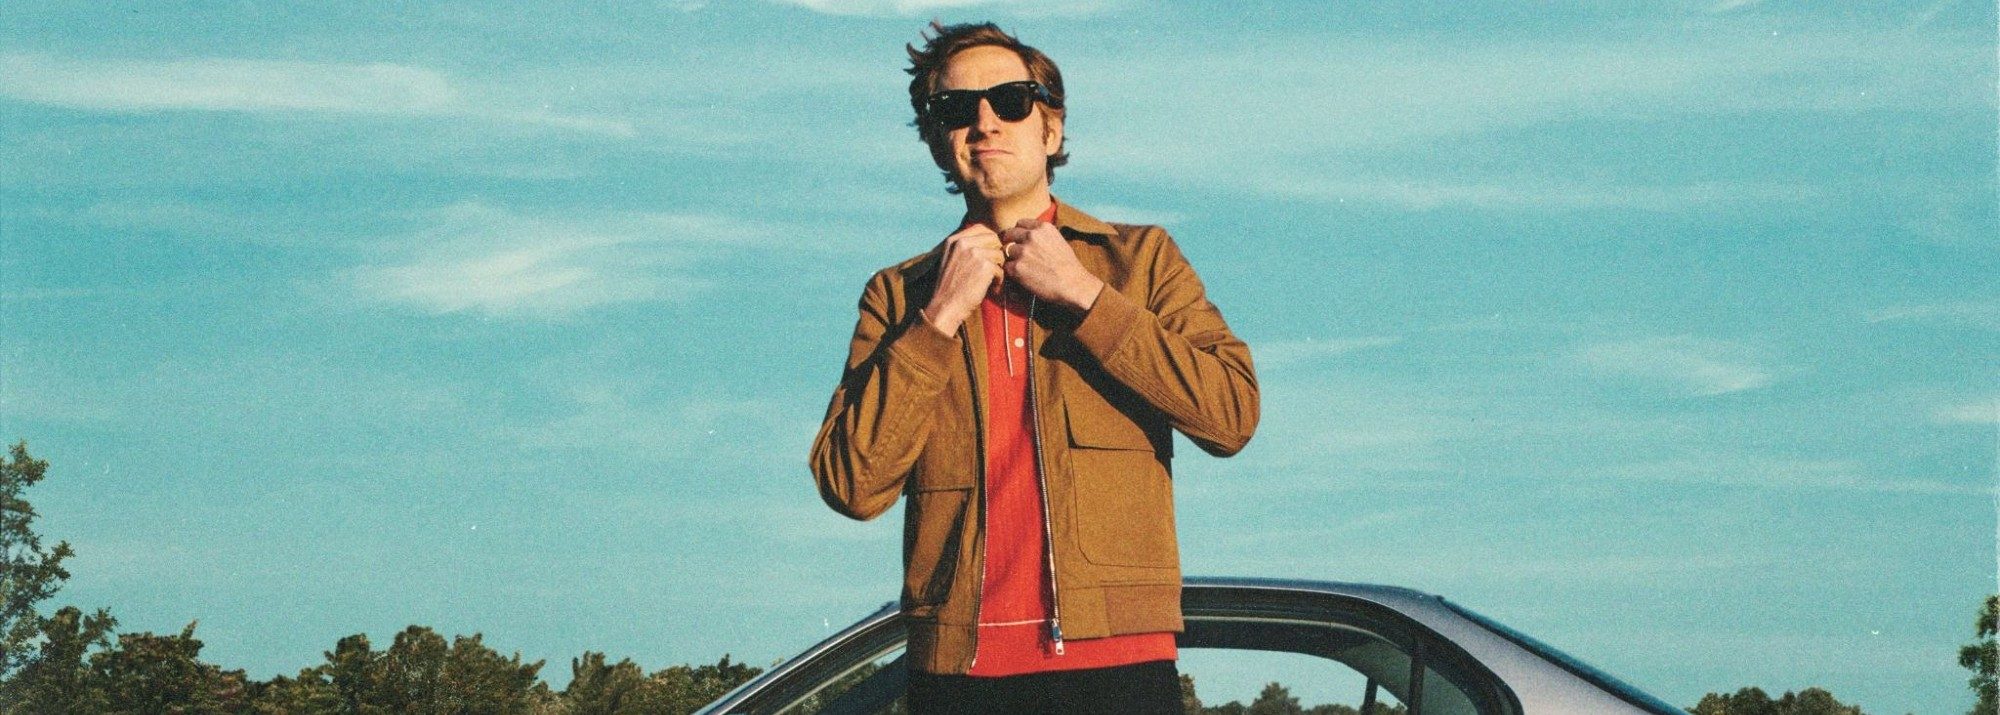 Ben Rector Stretches His Creative Wings With “Range Rover”